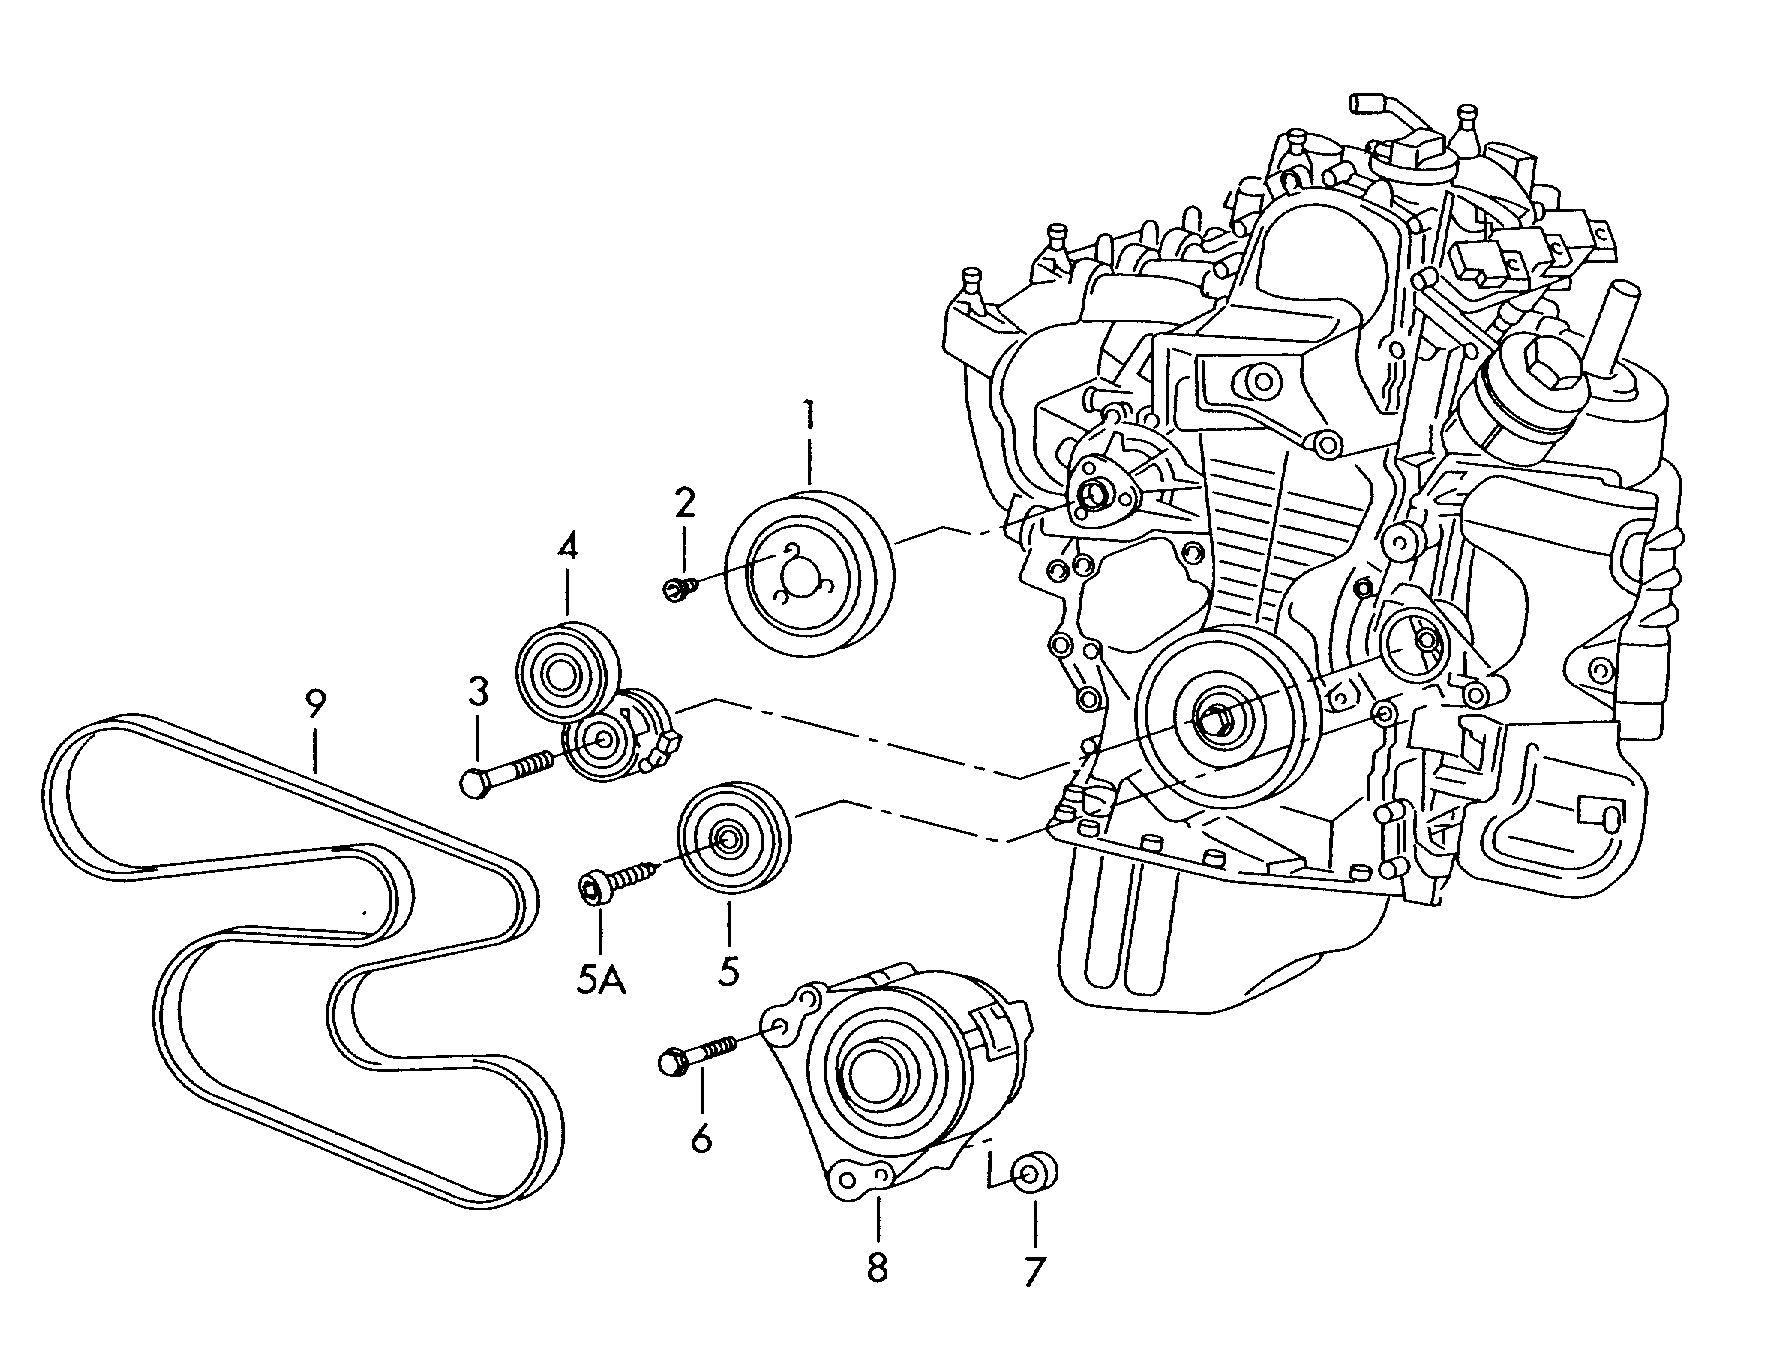 connecting and mounting parts<br>for alternatorPoly-V-belt 1.4ltr. - Jetta - je